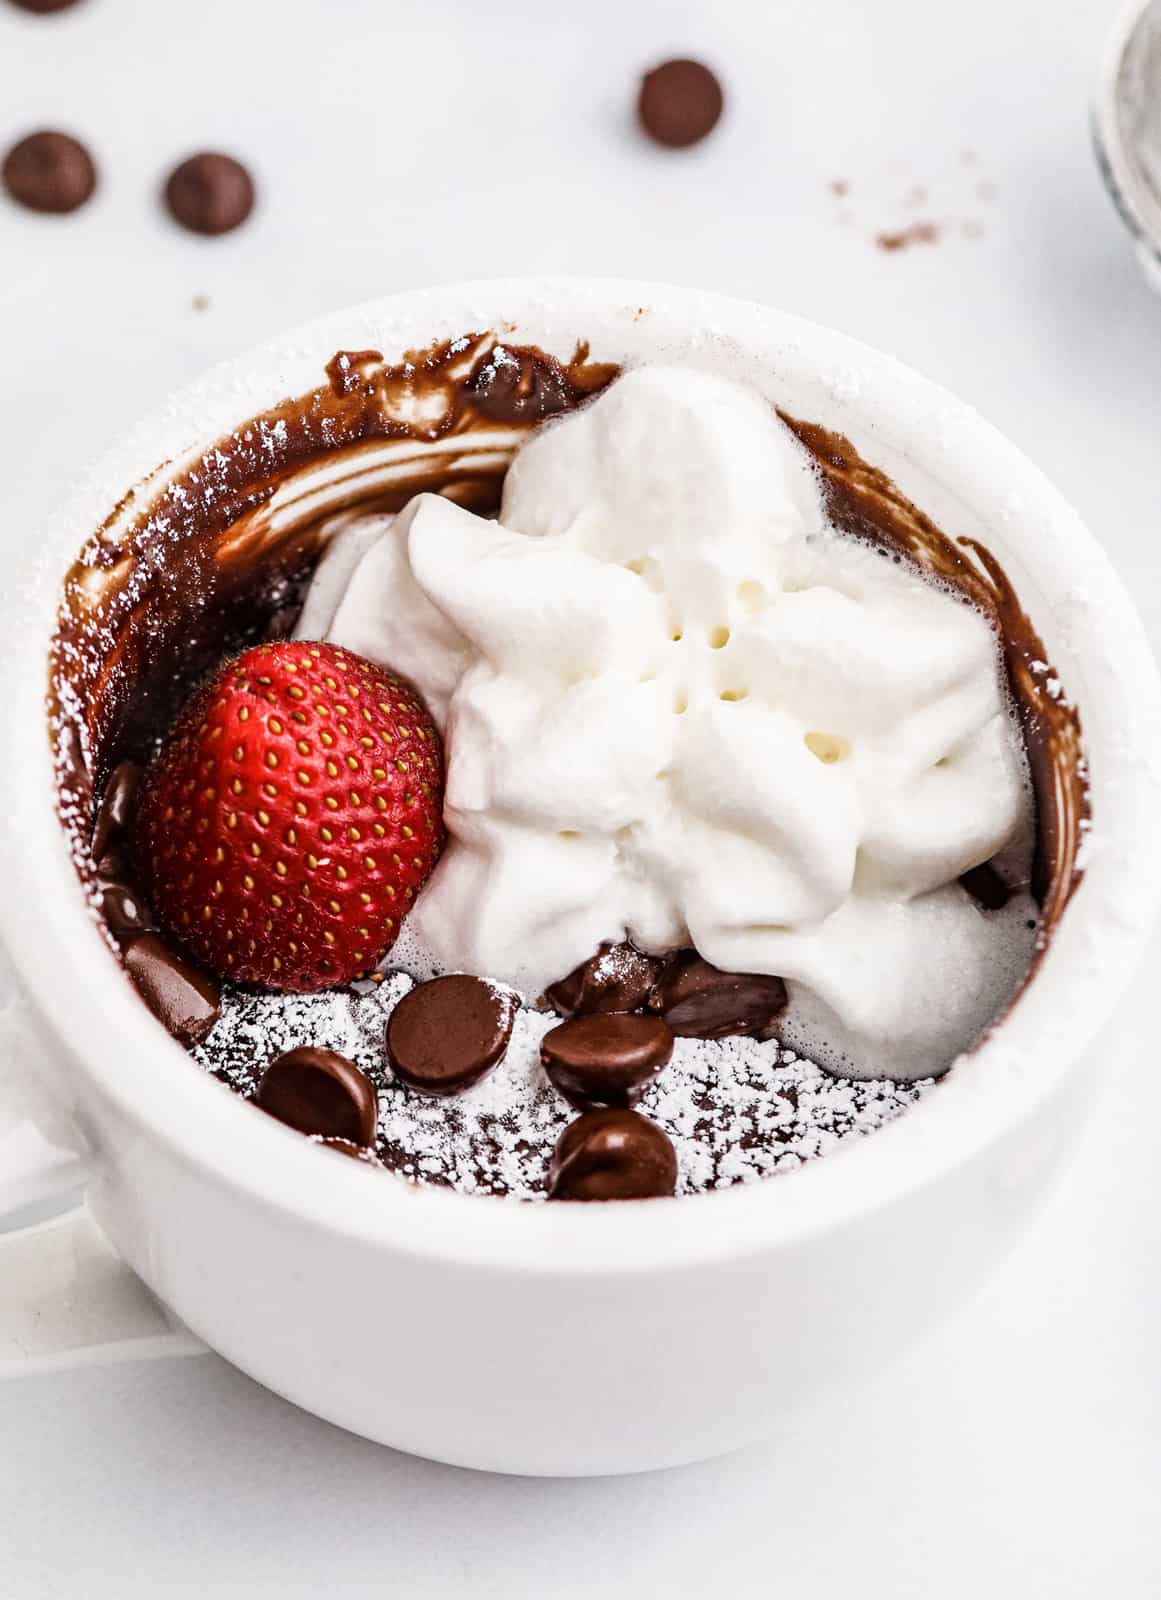 Finished Brownie in a Mug topped with powdered sugar, strawberry and whipped cream